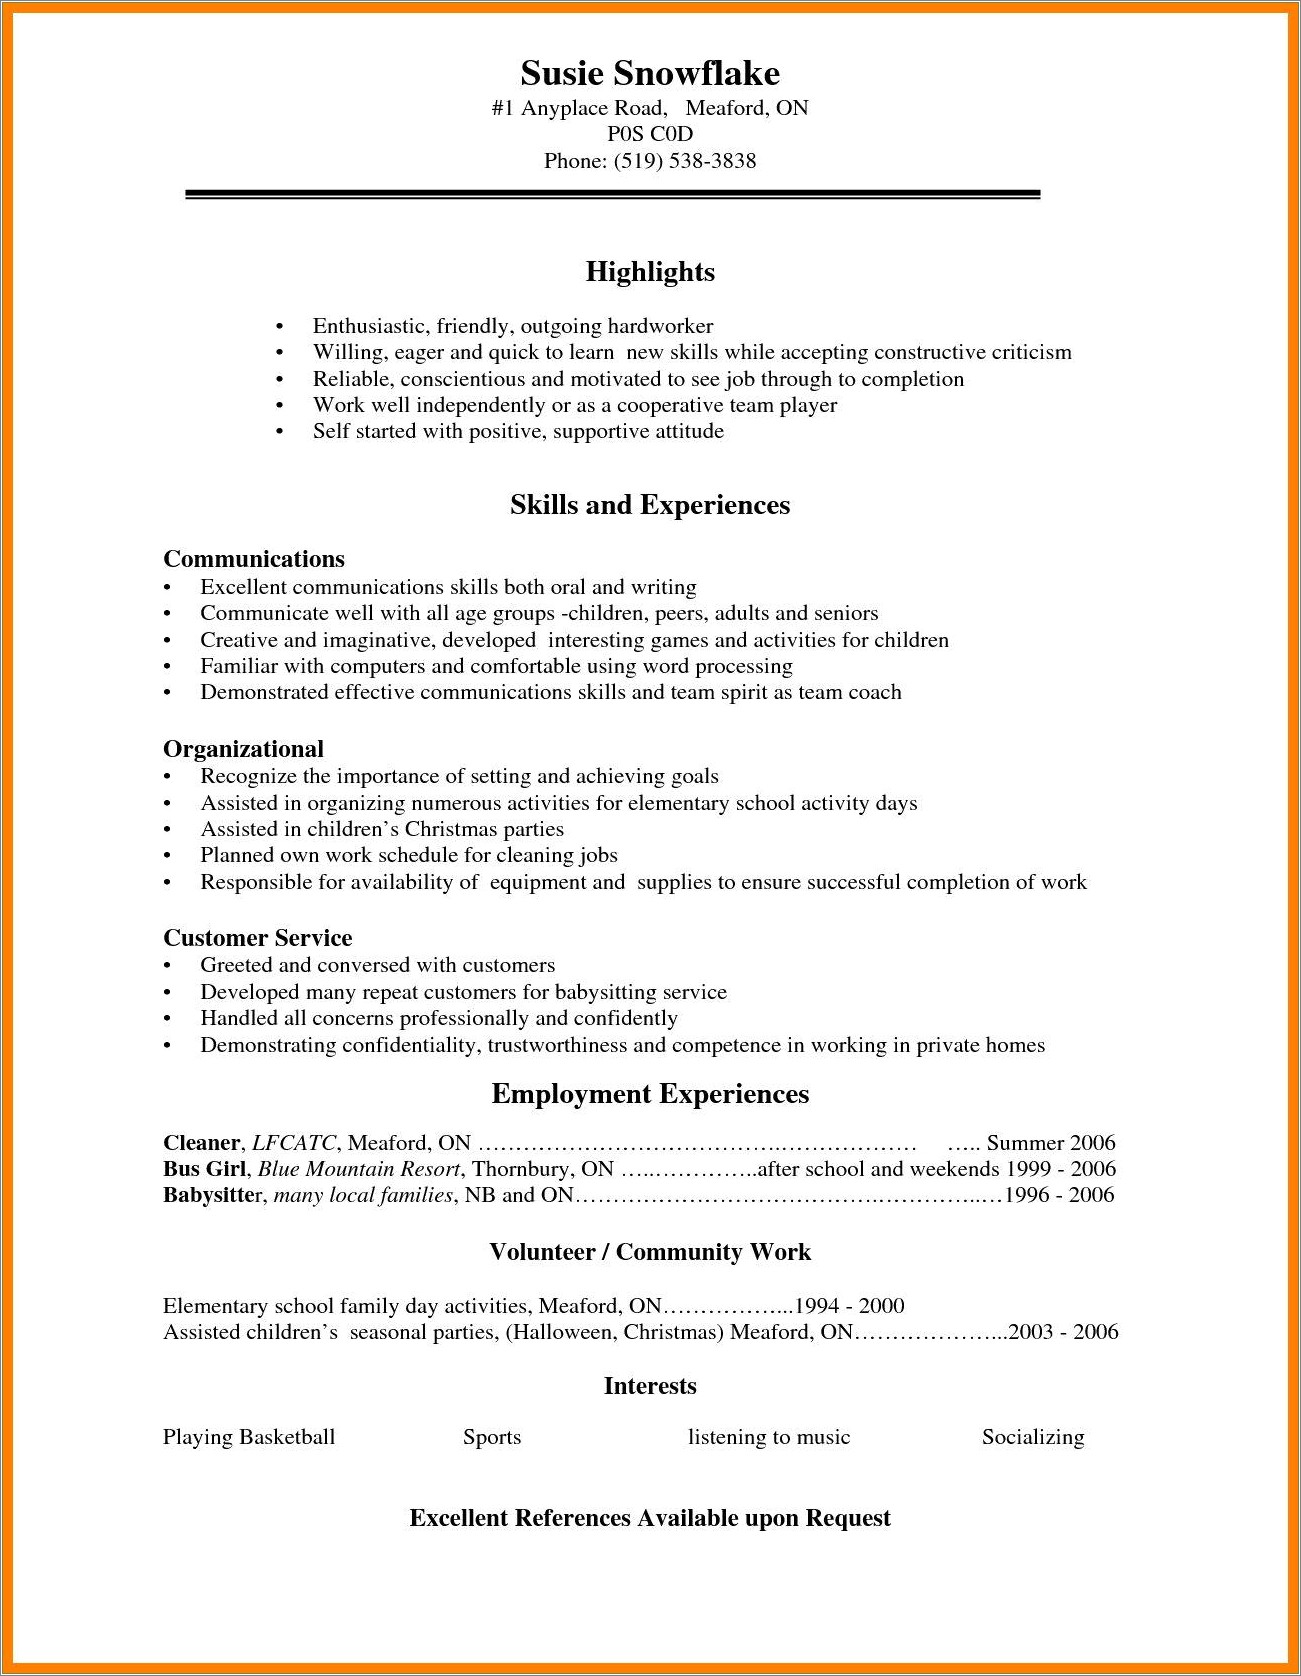 Word 2003 Resume Template For High School Student